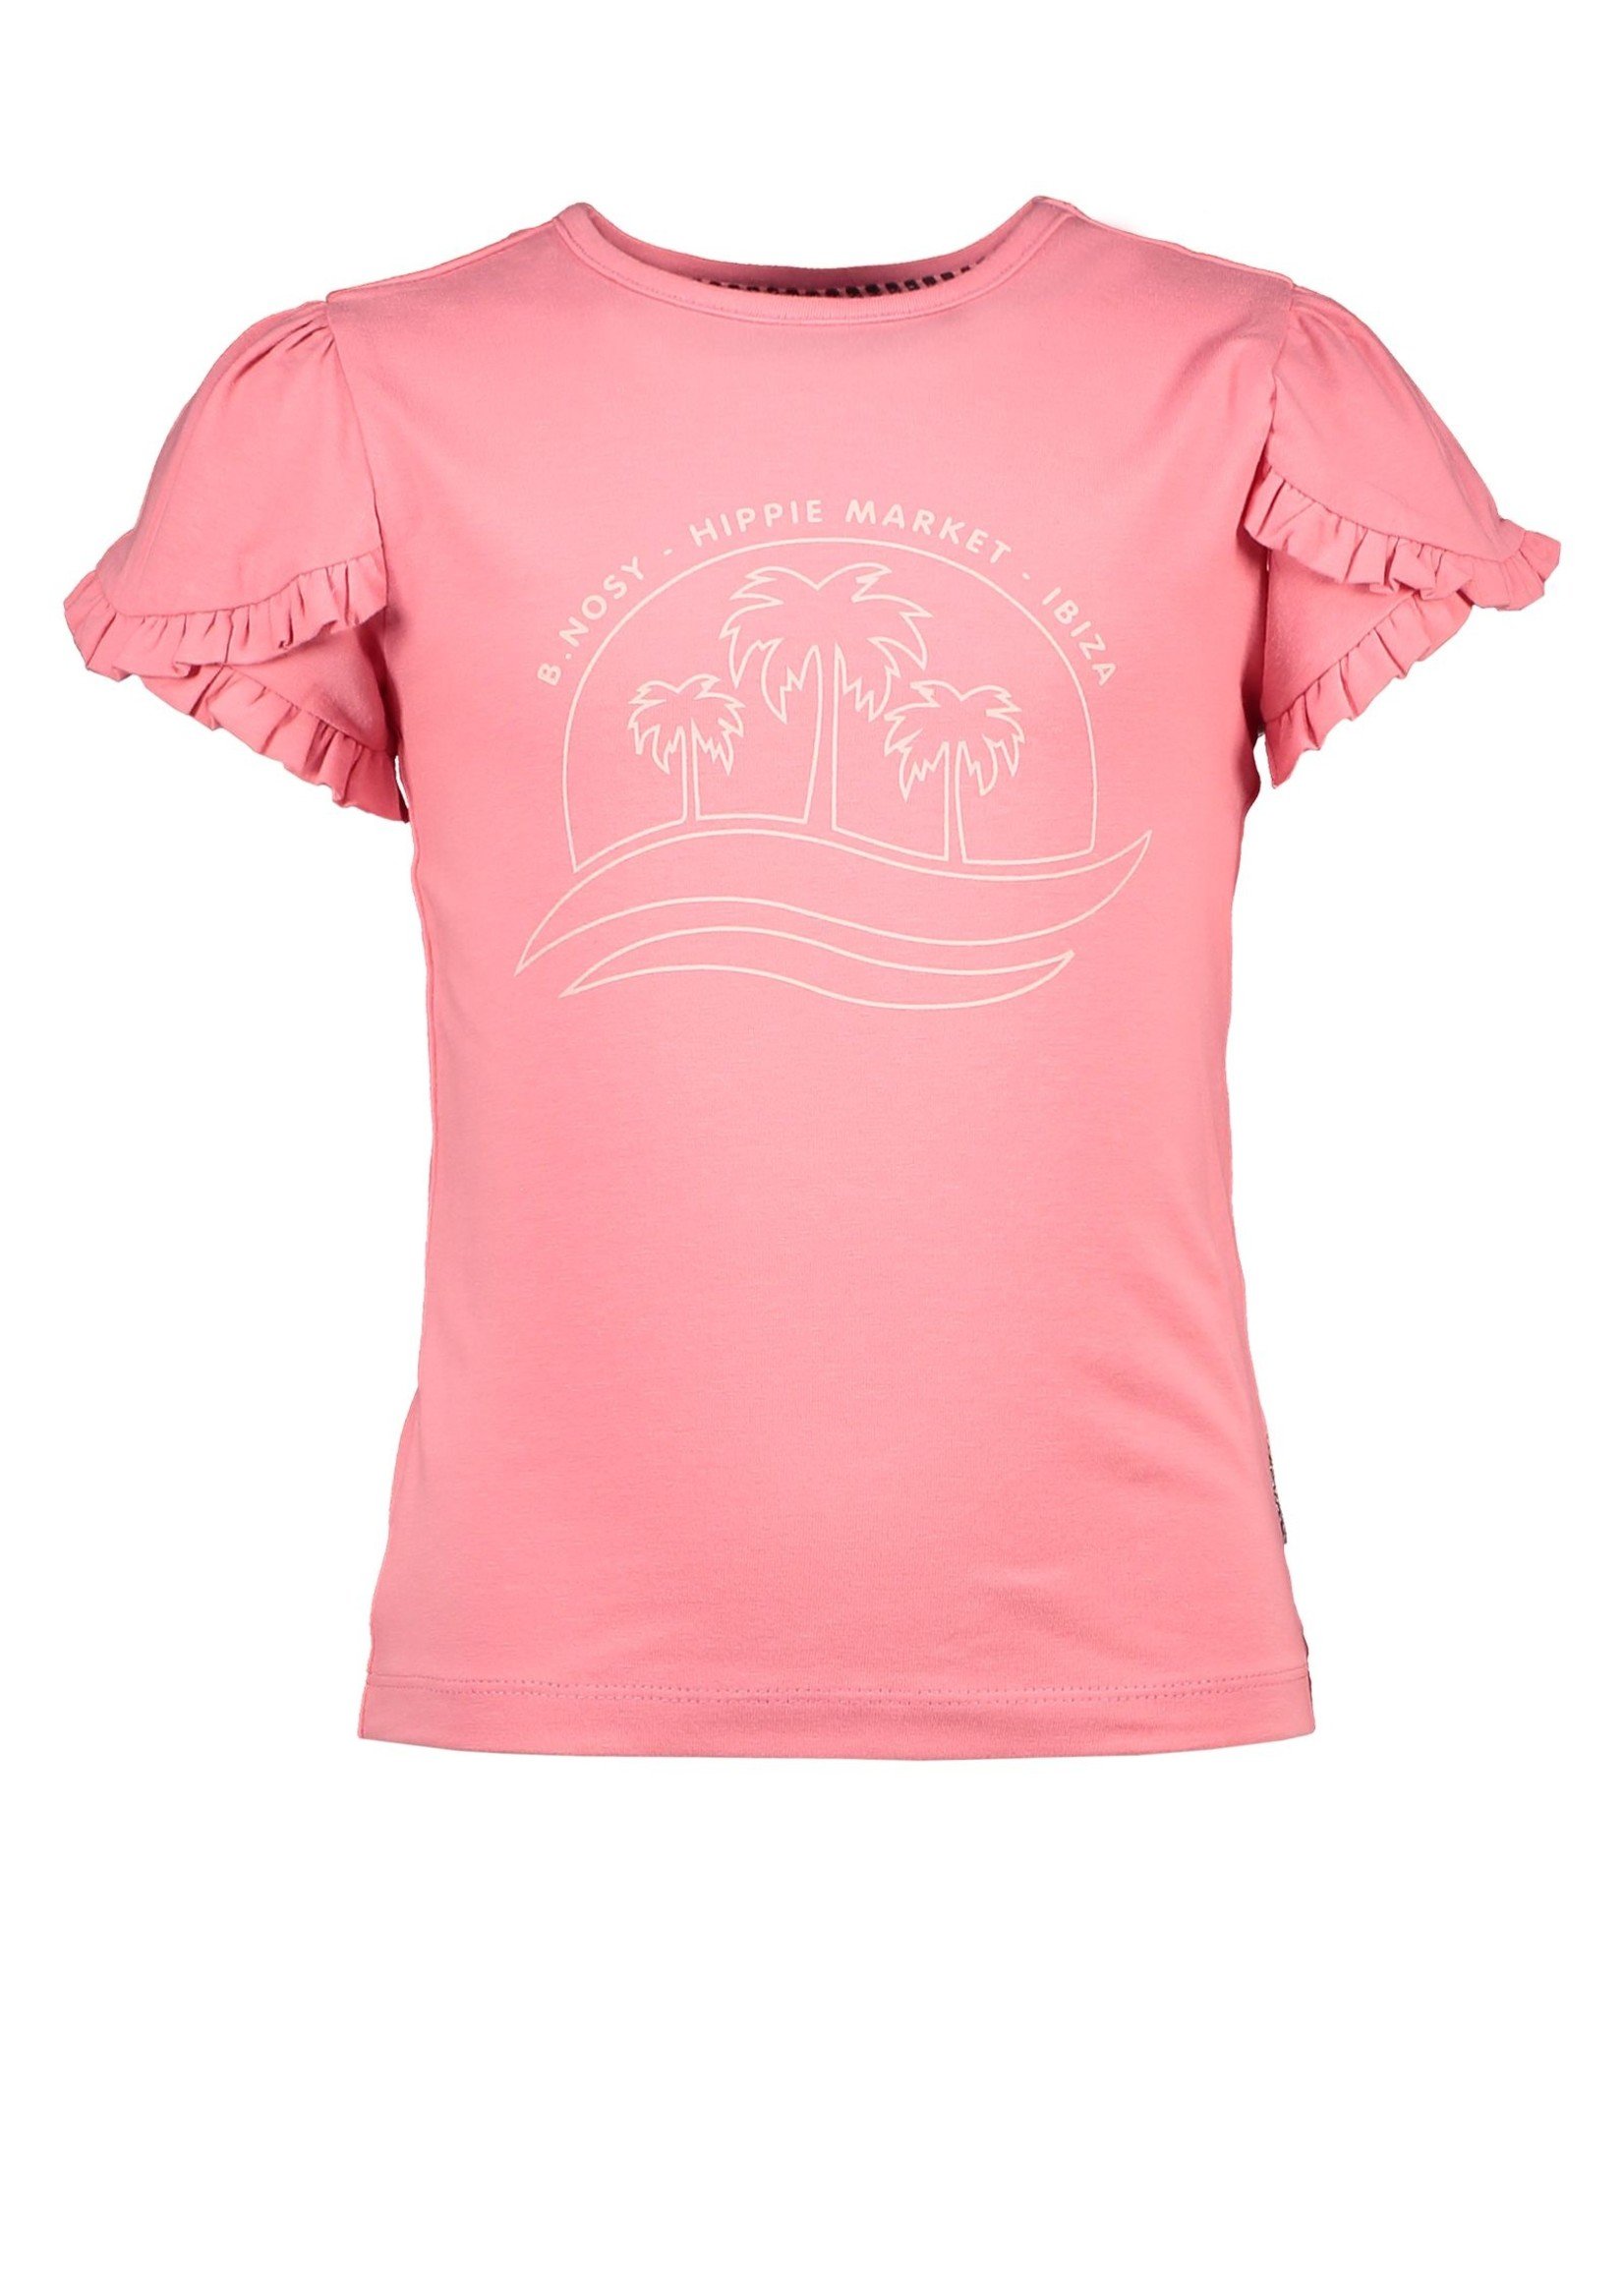 B-Nosy Girls t-shirt with fancy ruffled sleeves and chest artwork, confetti